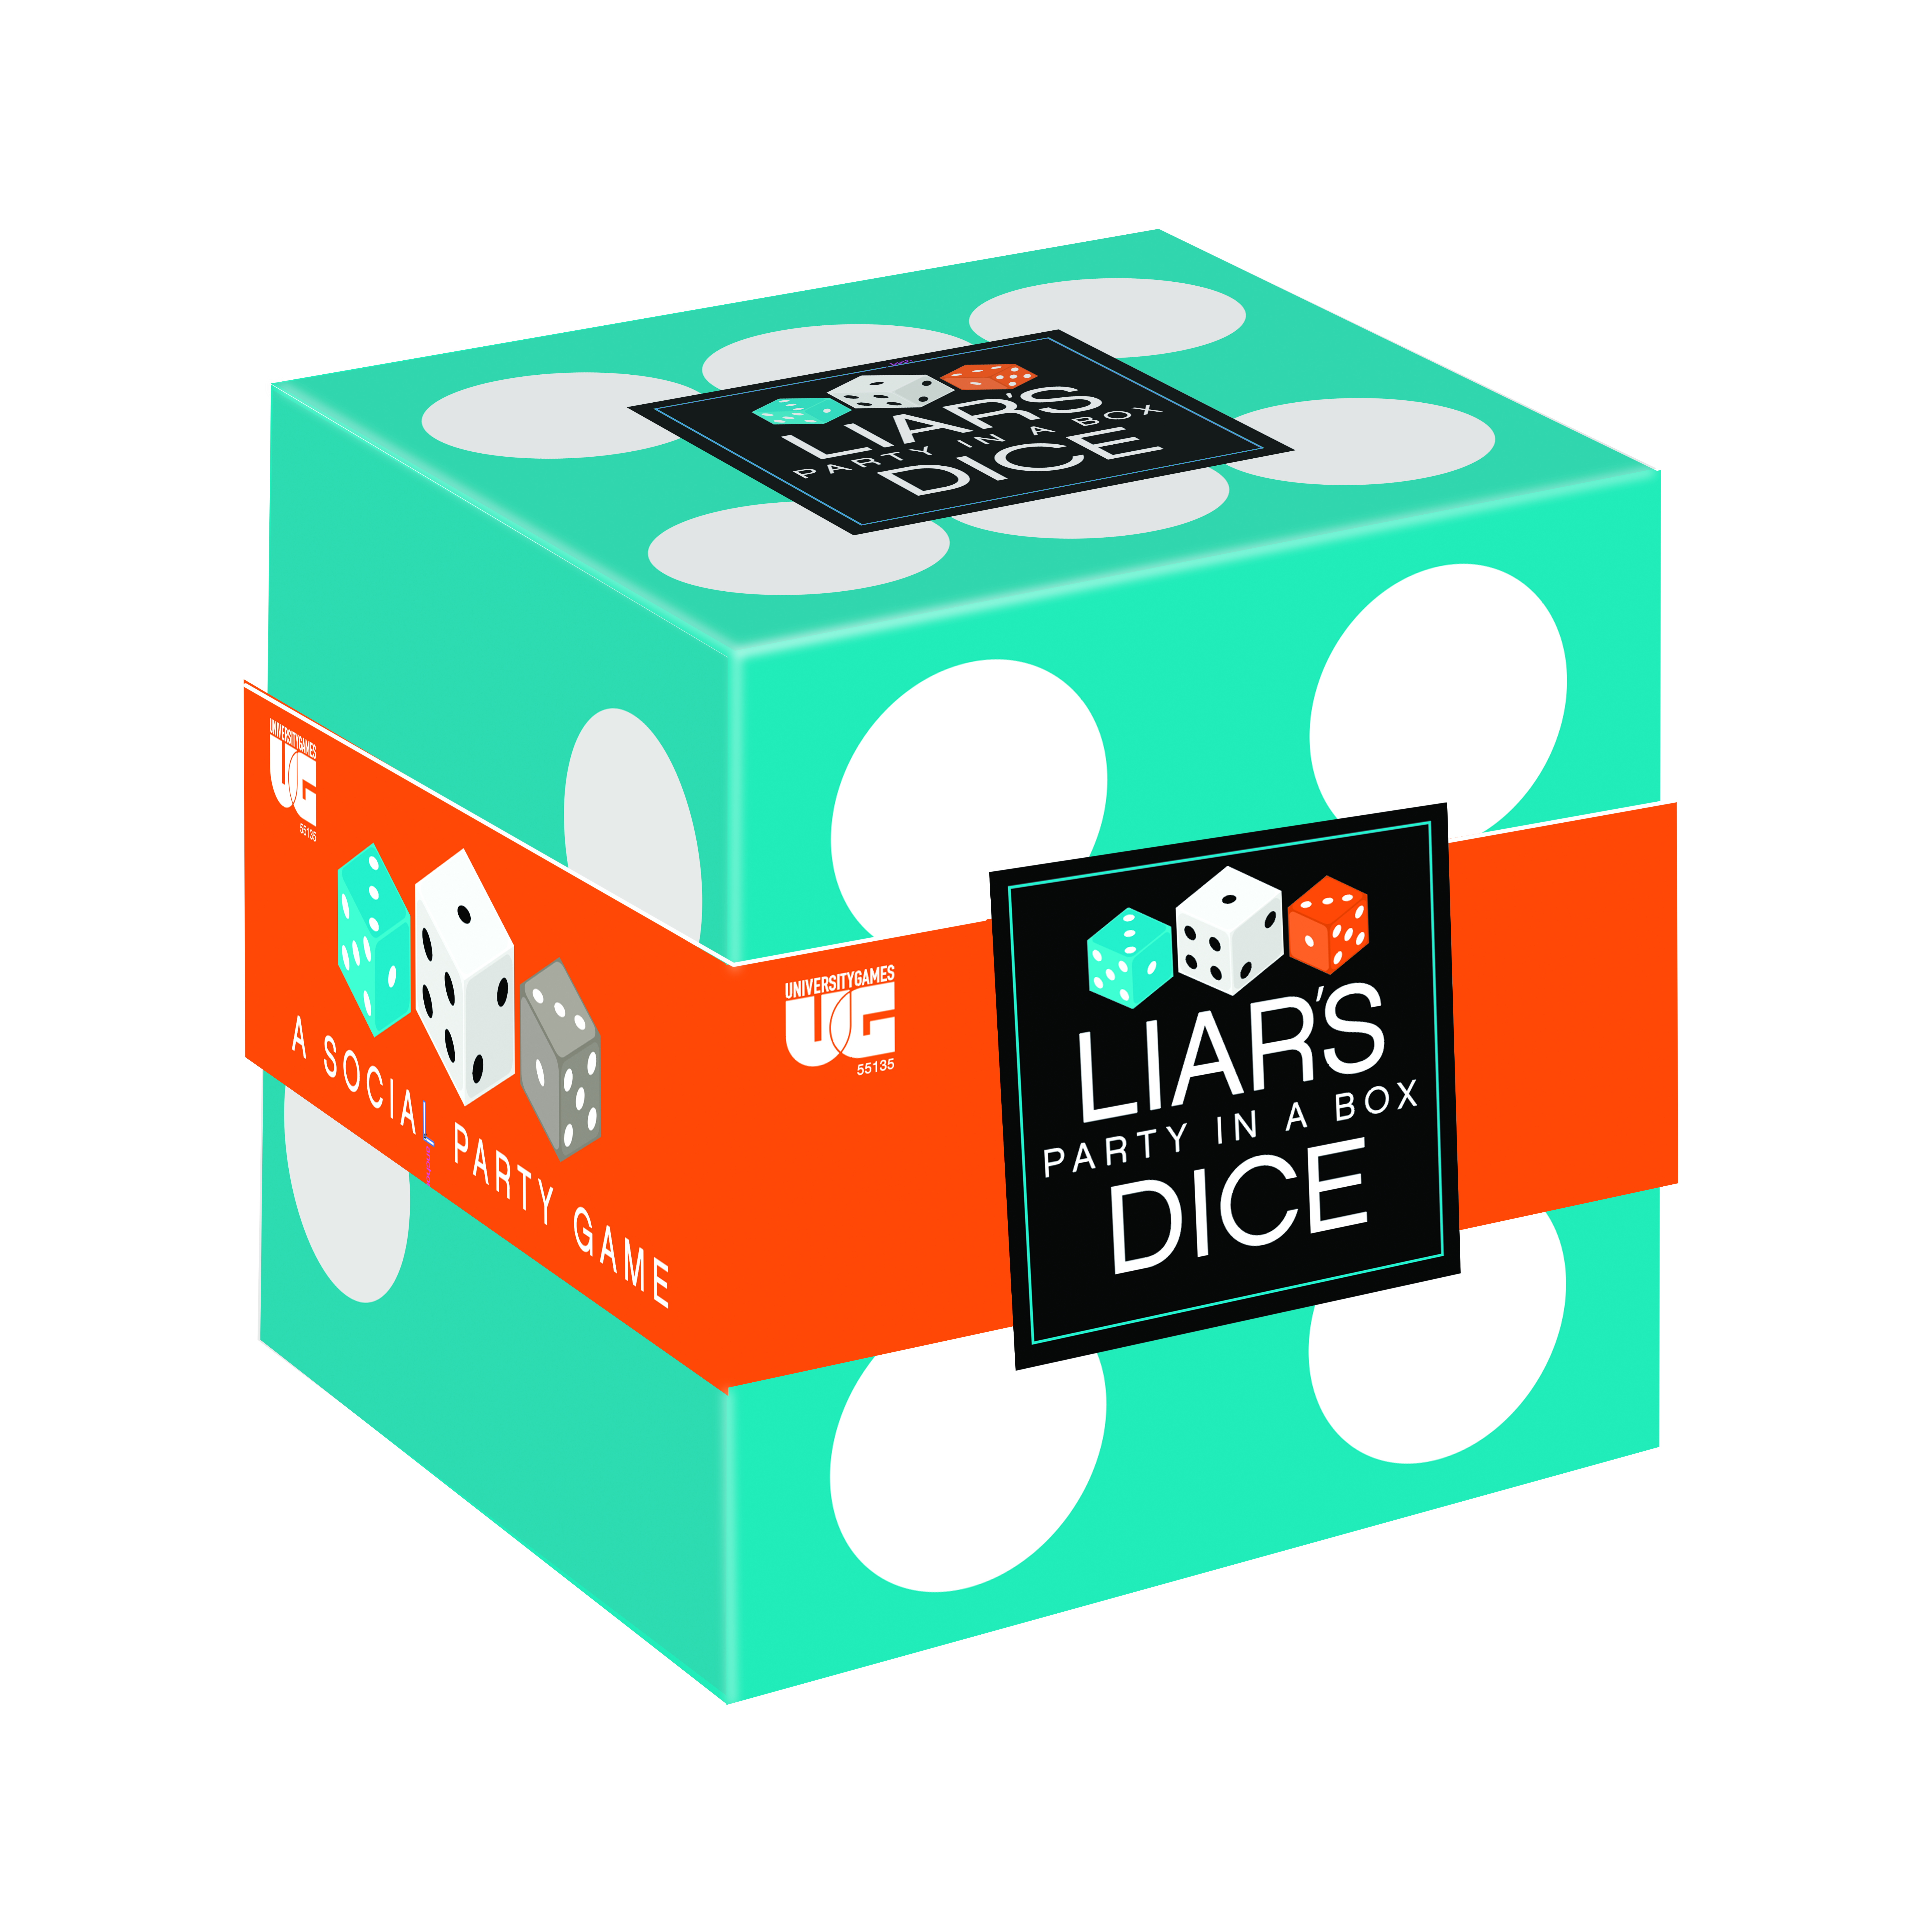 Liar's Dice Party in a Box